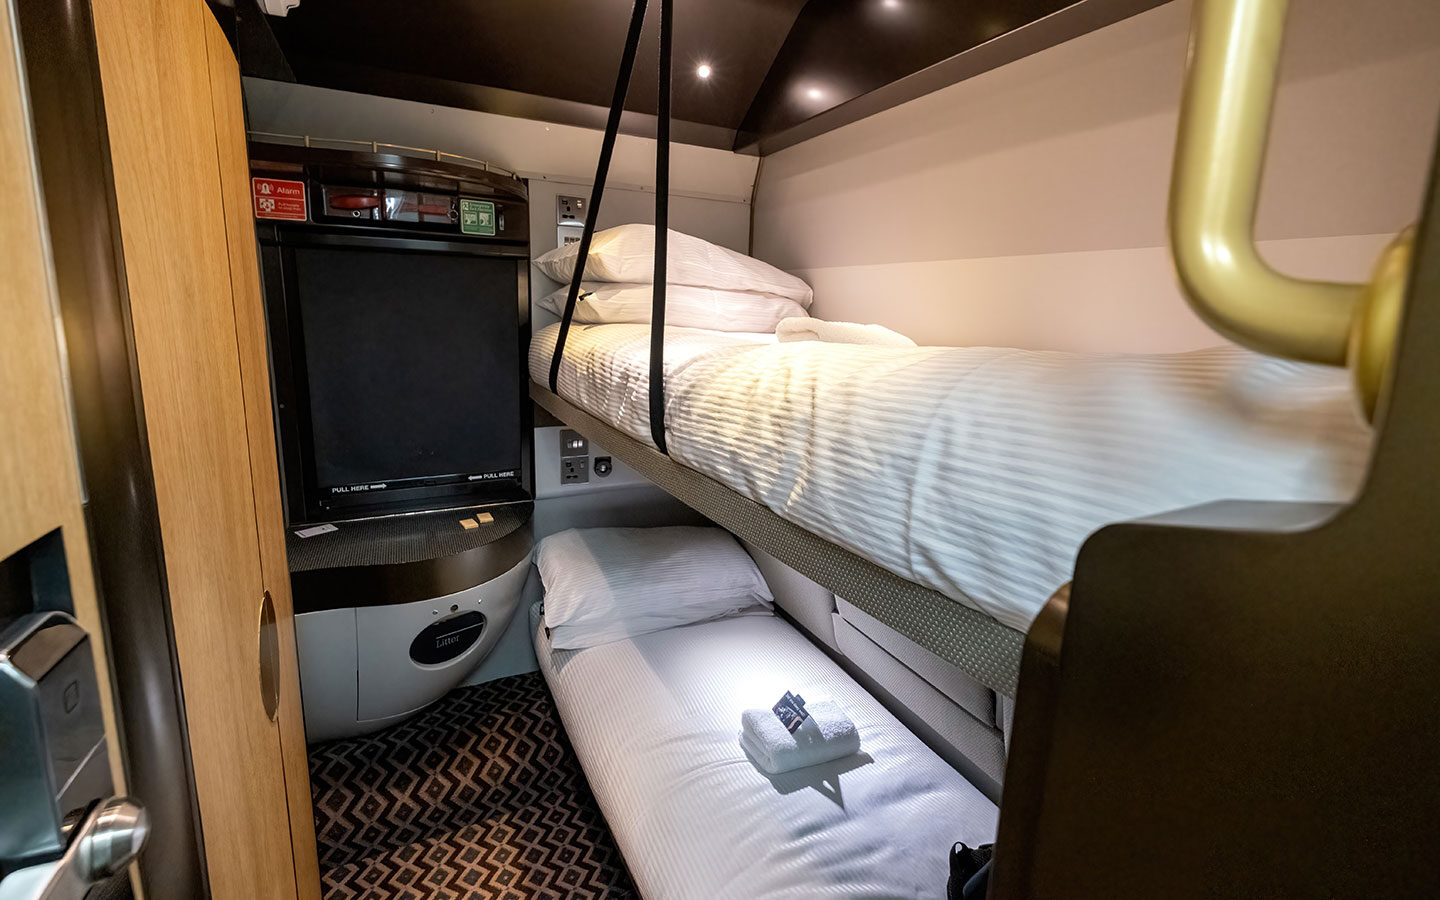 Bunks on the Night Riviera Sleeper train from London to Cornwall